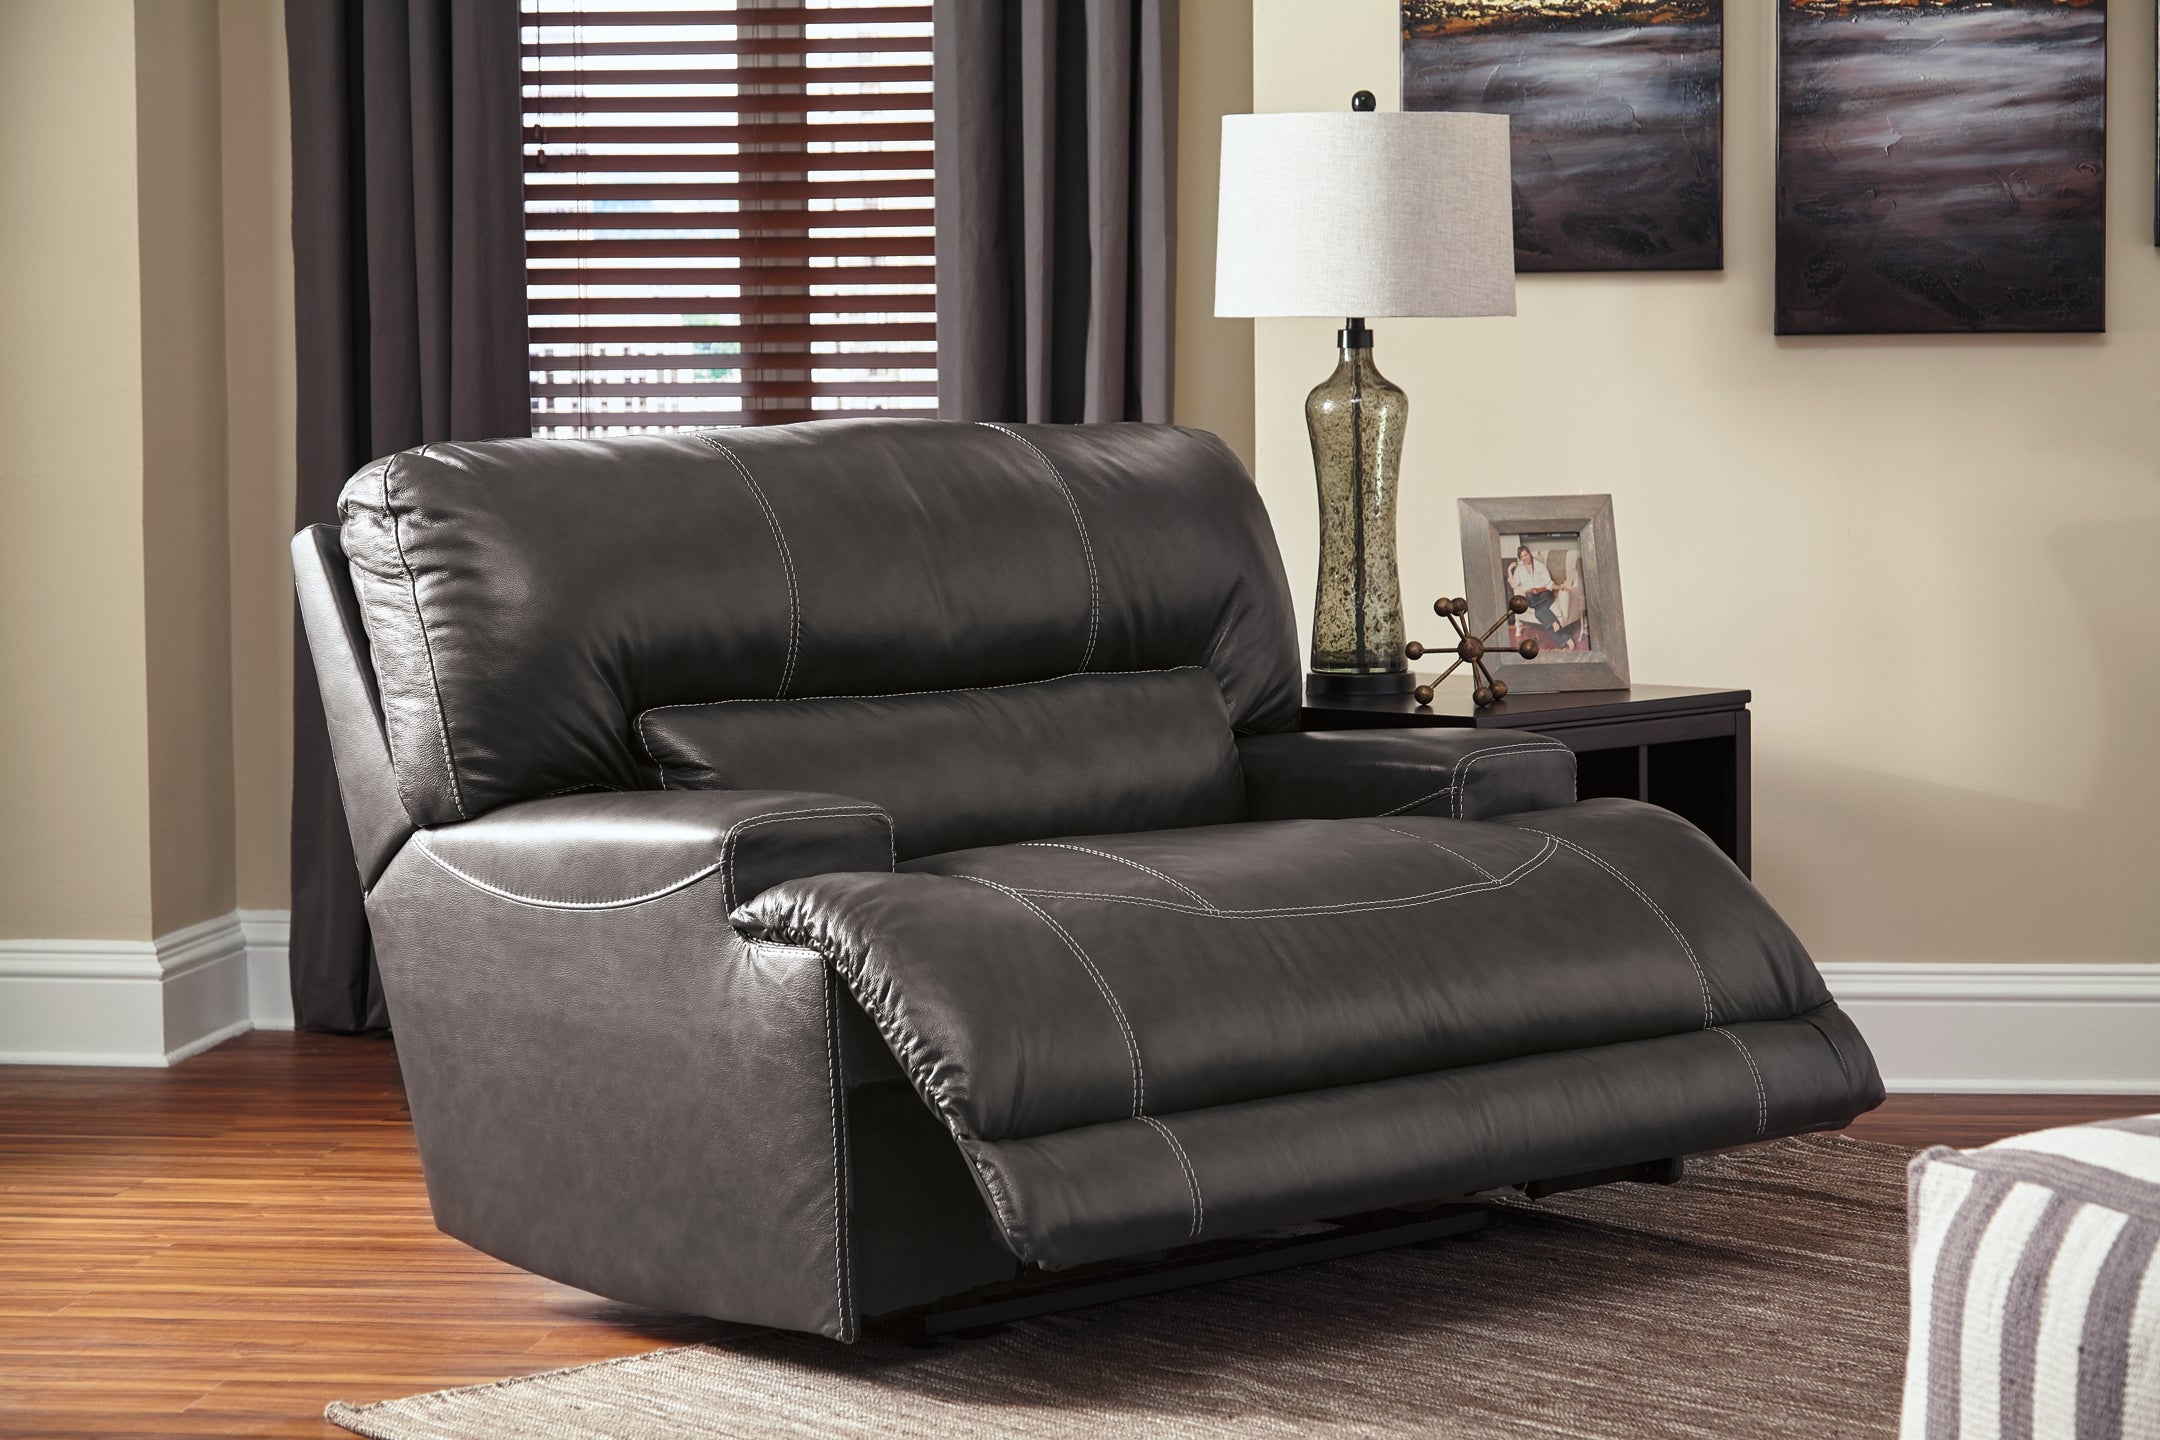 Finding the Perfect Fit with an Extra Large Recliner插图4